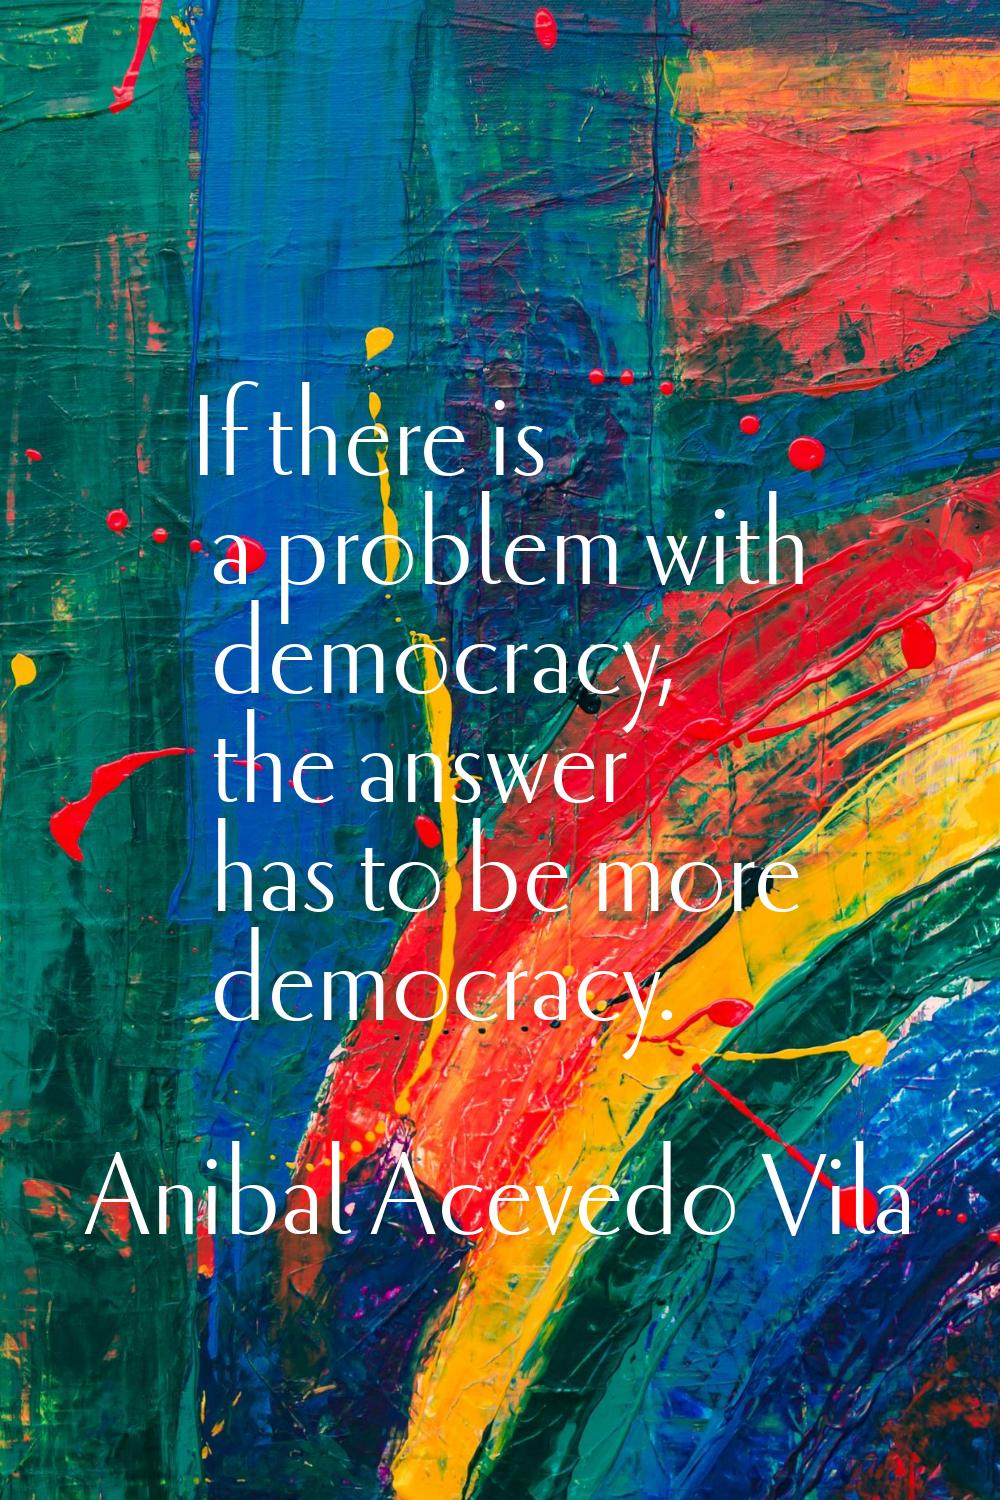 If there is a problem with democracy, the answer has to be more democracy.